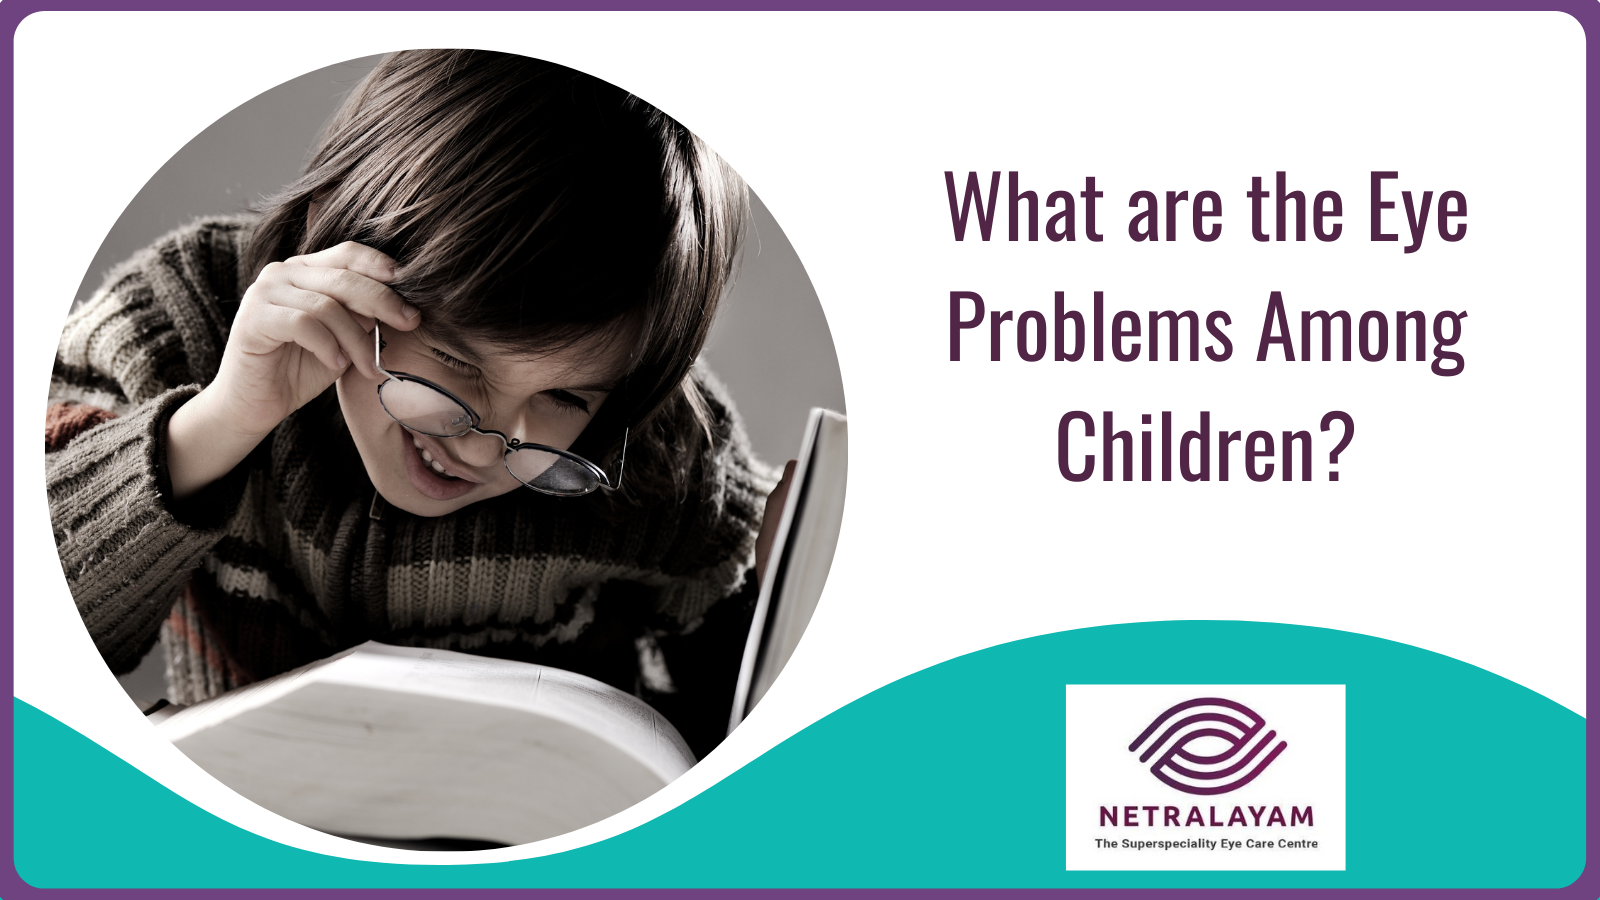 What are the Eye Problems Among Children?